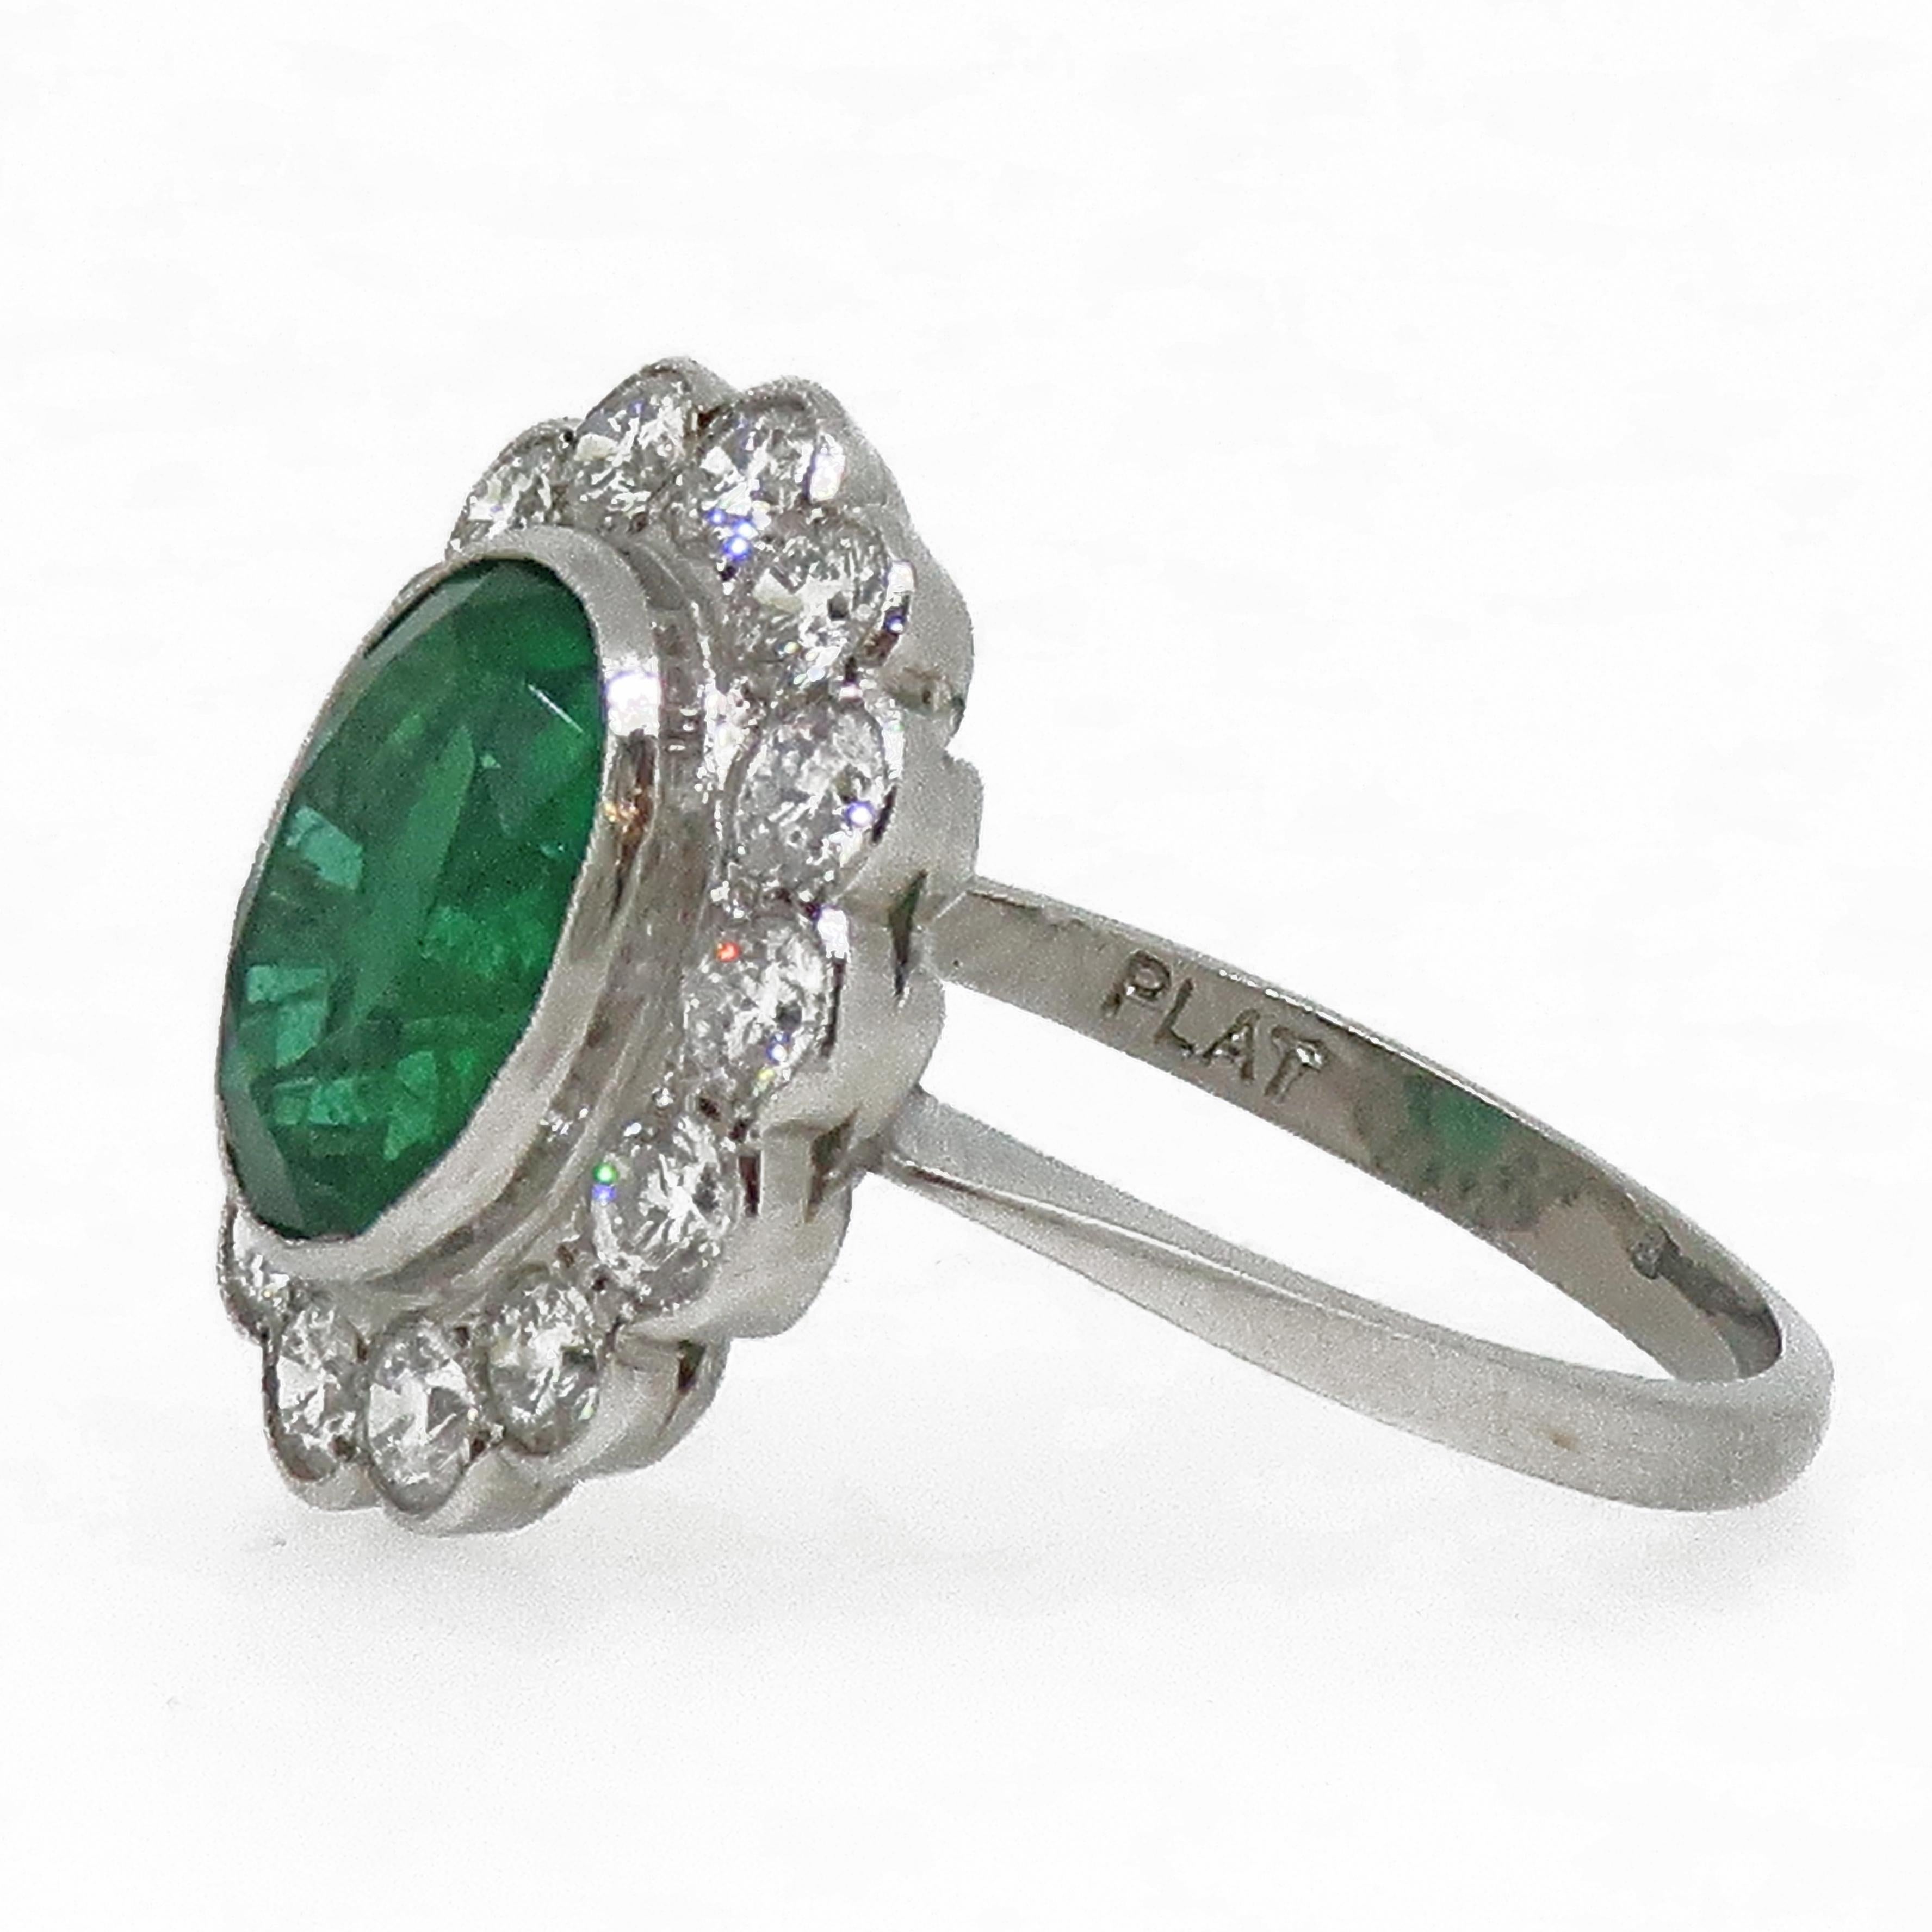 Platinum Oval Emerald and Diamond Cluster Ring

Large traditional oval emerald and diamond cluster ring. This stunning ring has a lovely vibrant green emerald surrounded by a halo of fourteen white brilliant cut diamonds. All stones set in a set in